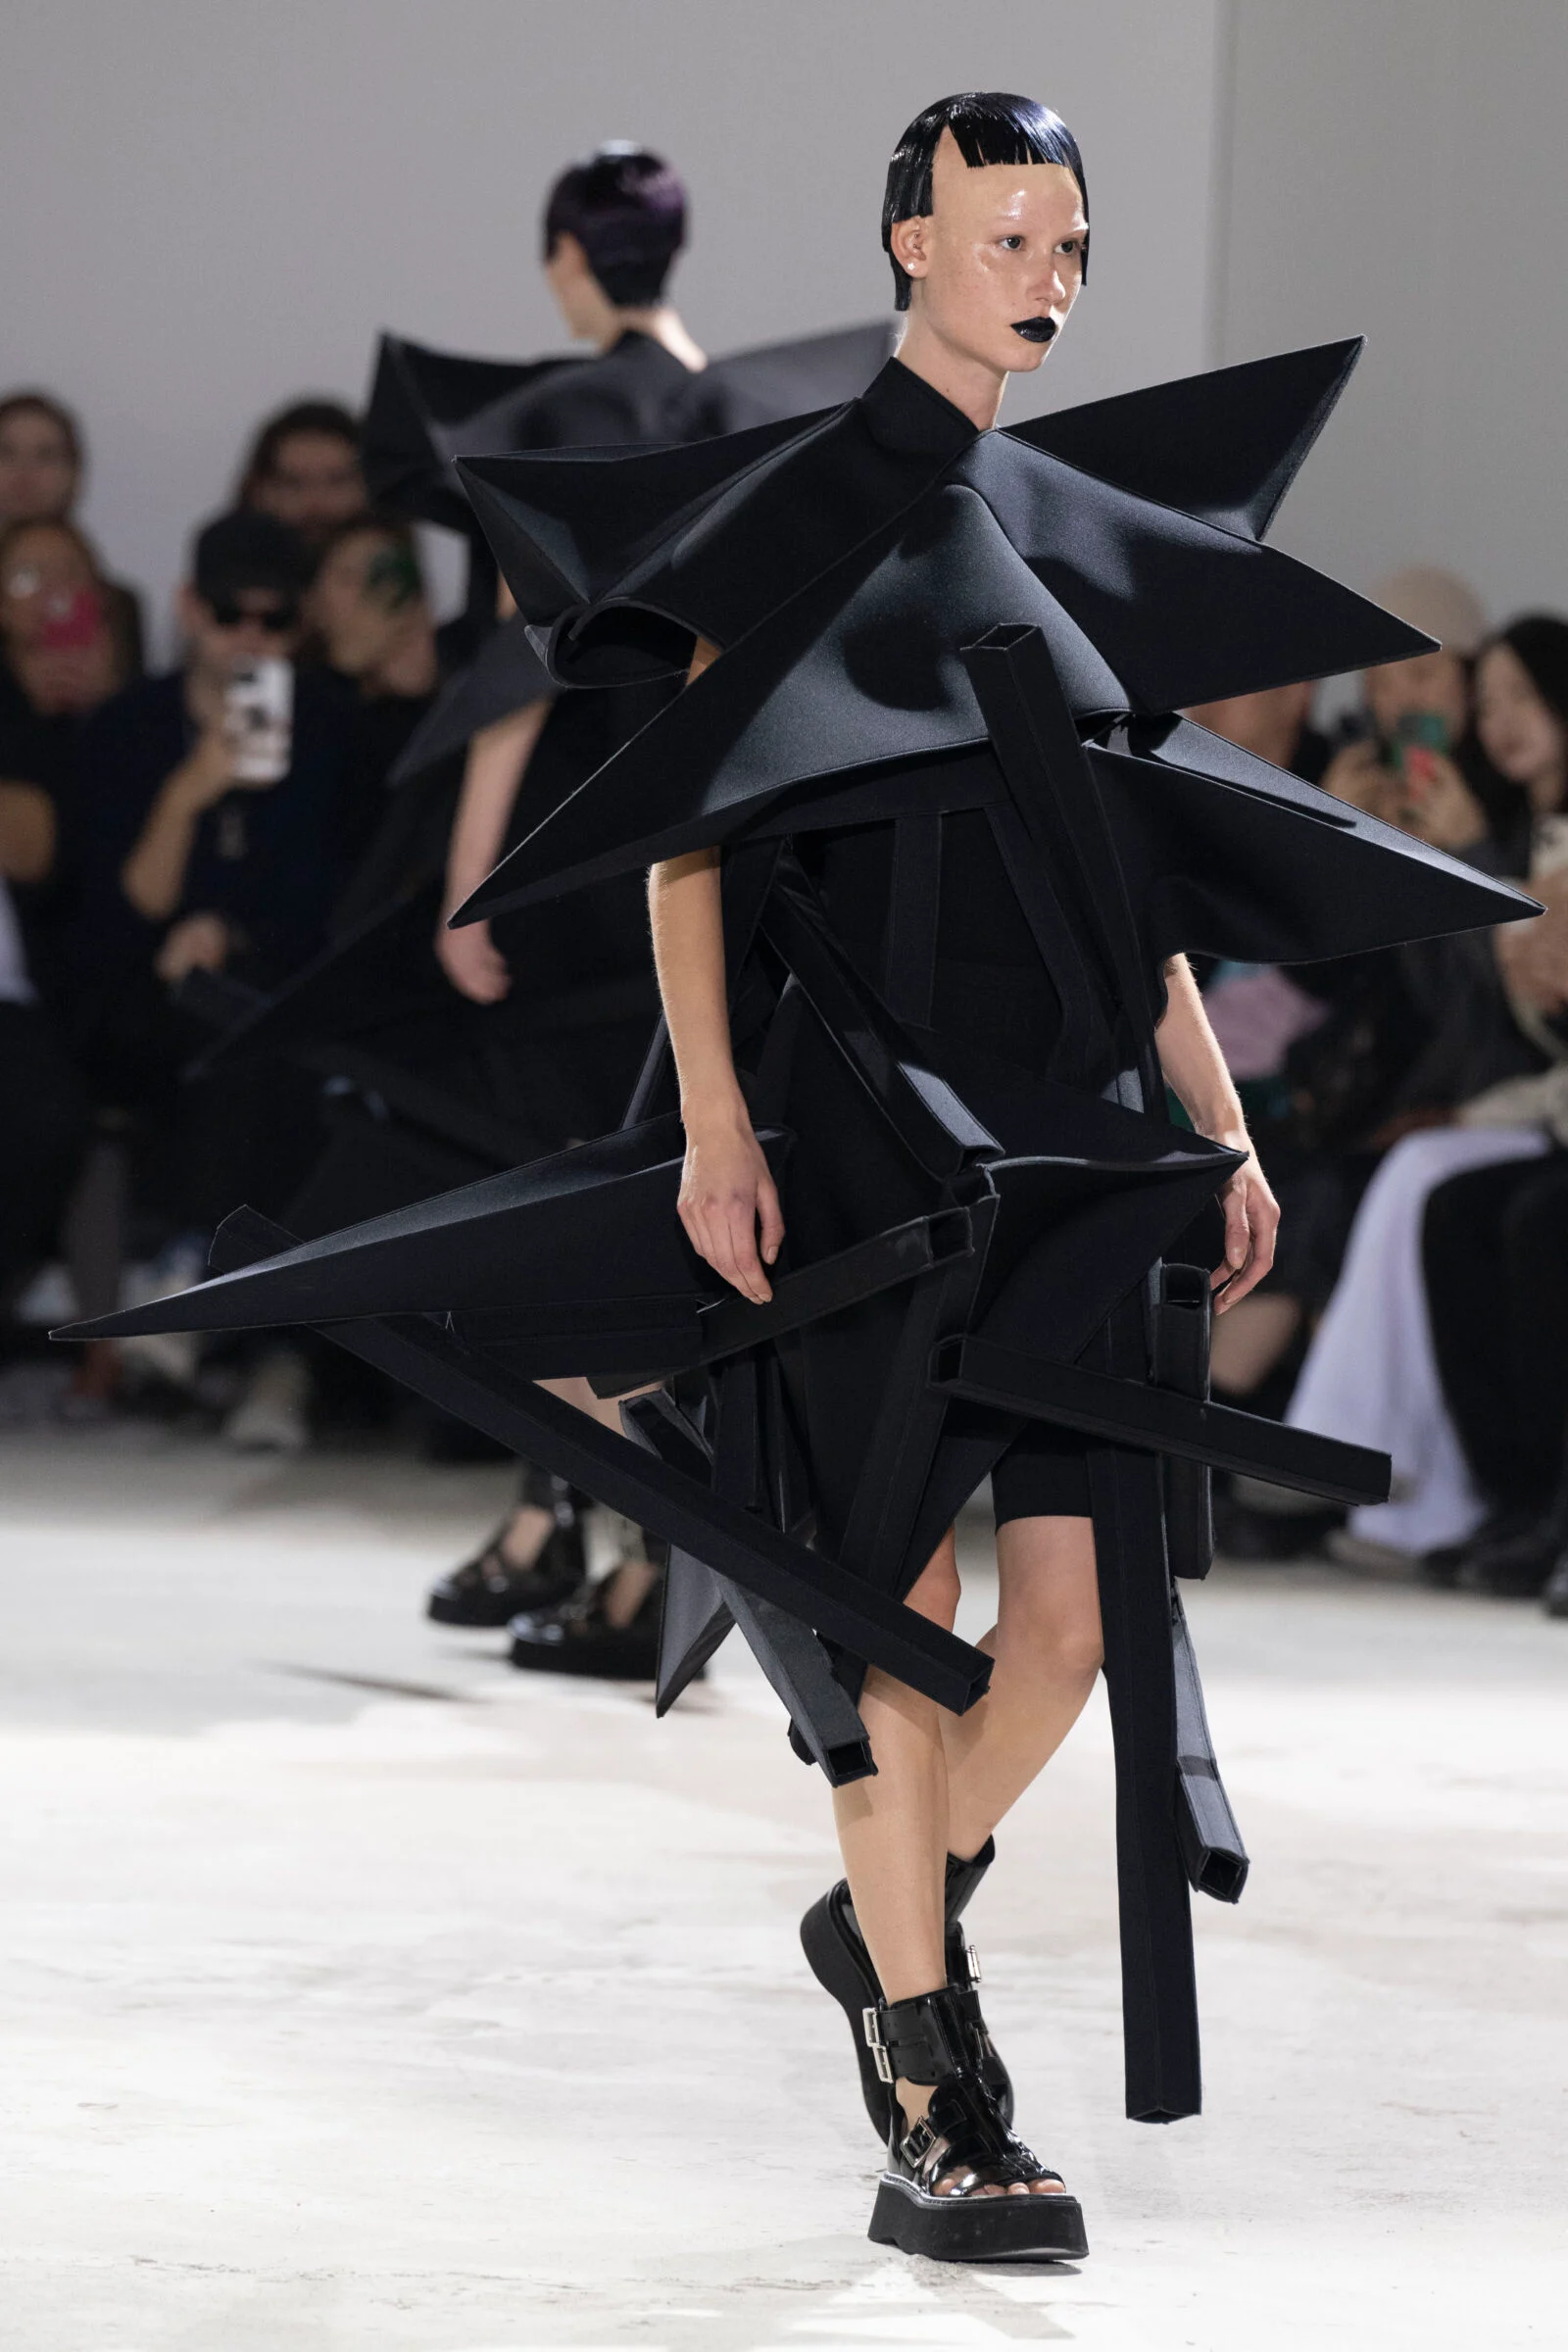 A Junya Watanabe creation breaks the mold, setting a new standard for avant-garde aesthetics in the industry.
